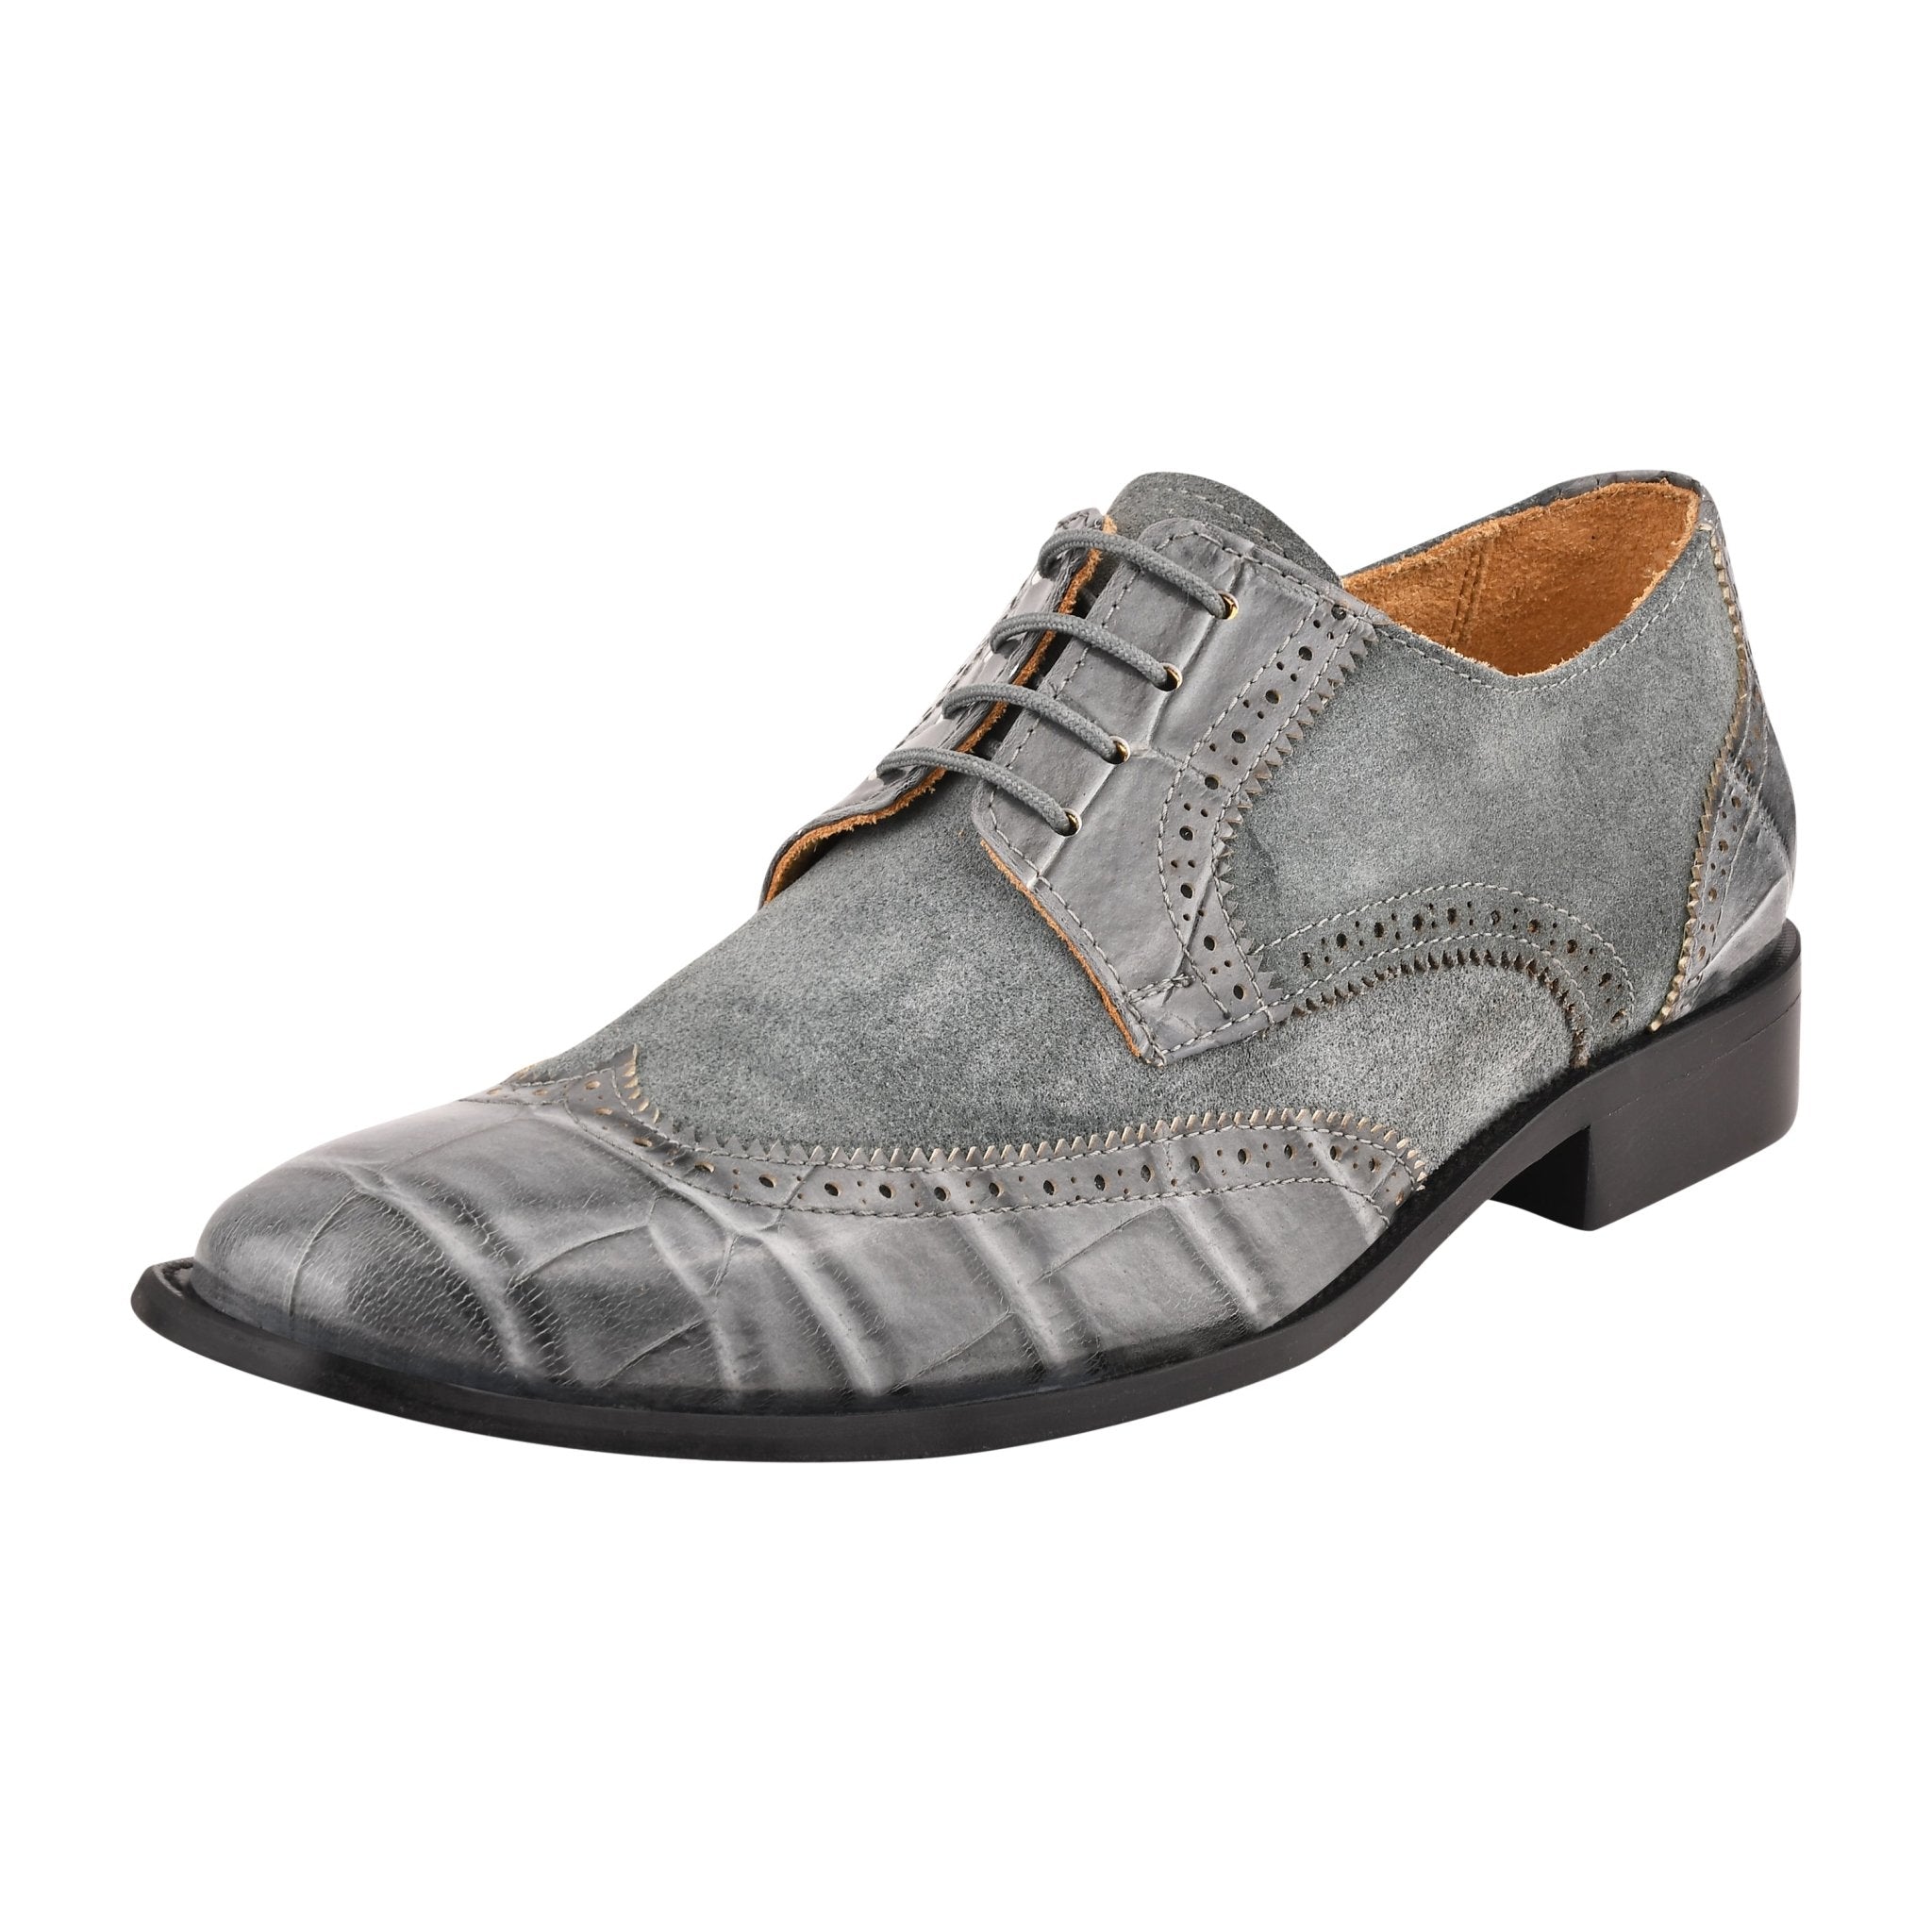 Macon Leather and Suede Crocodile Printed Oxford Dress Shoes